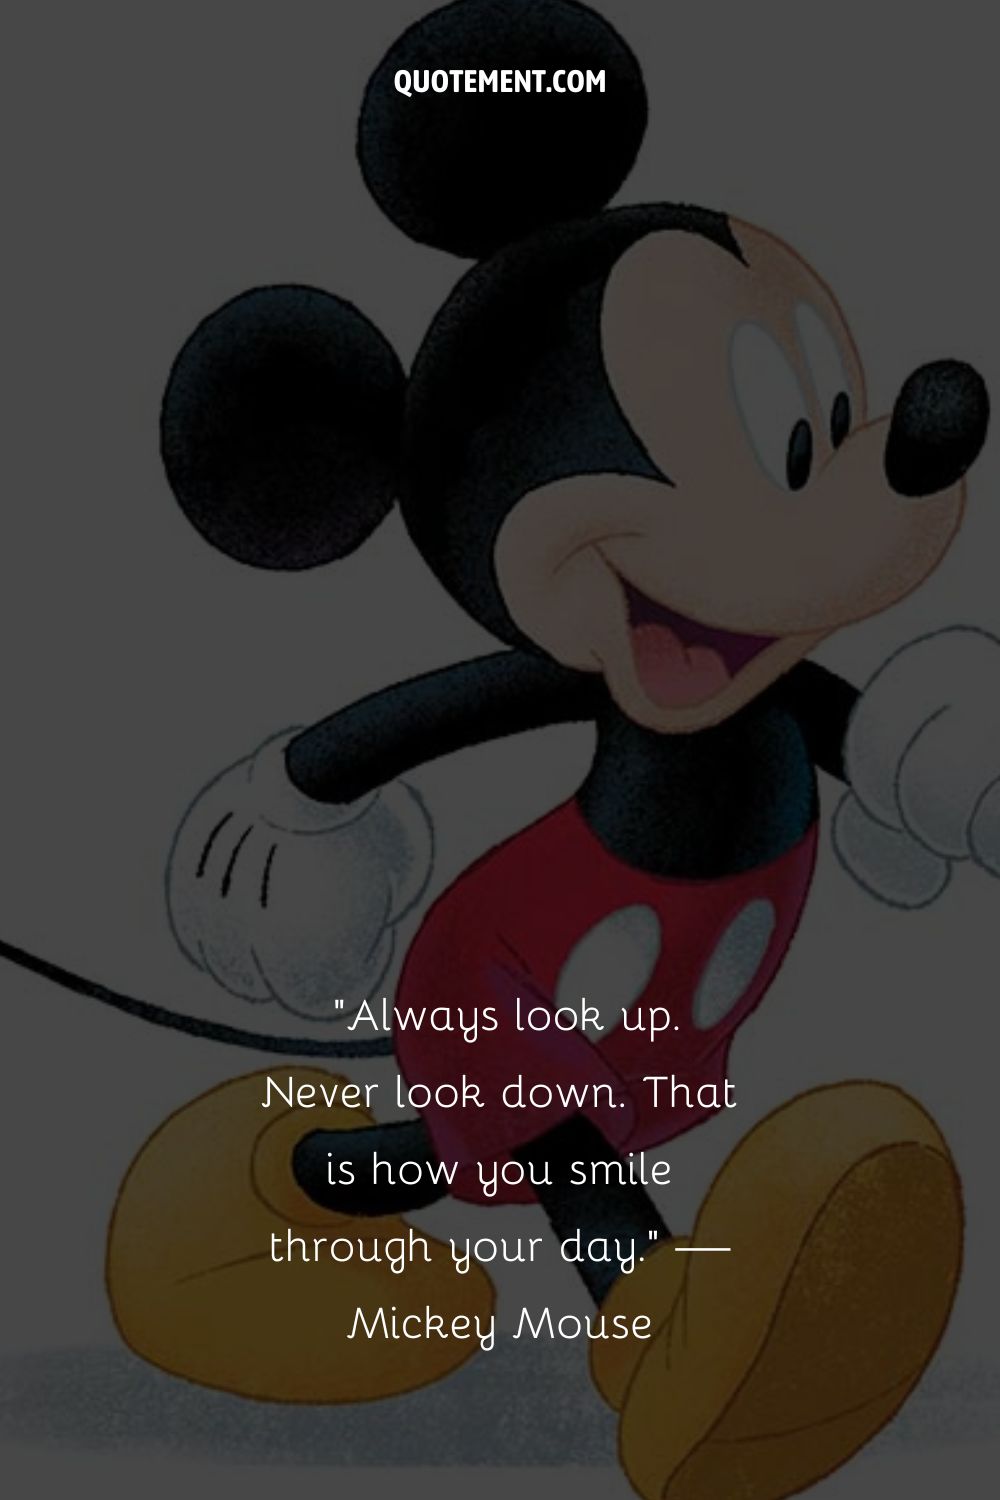 Illustration of a walking Mickey Mouse representing the top Mickey Mouse quote
